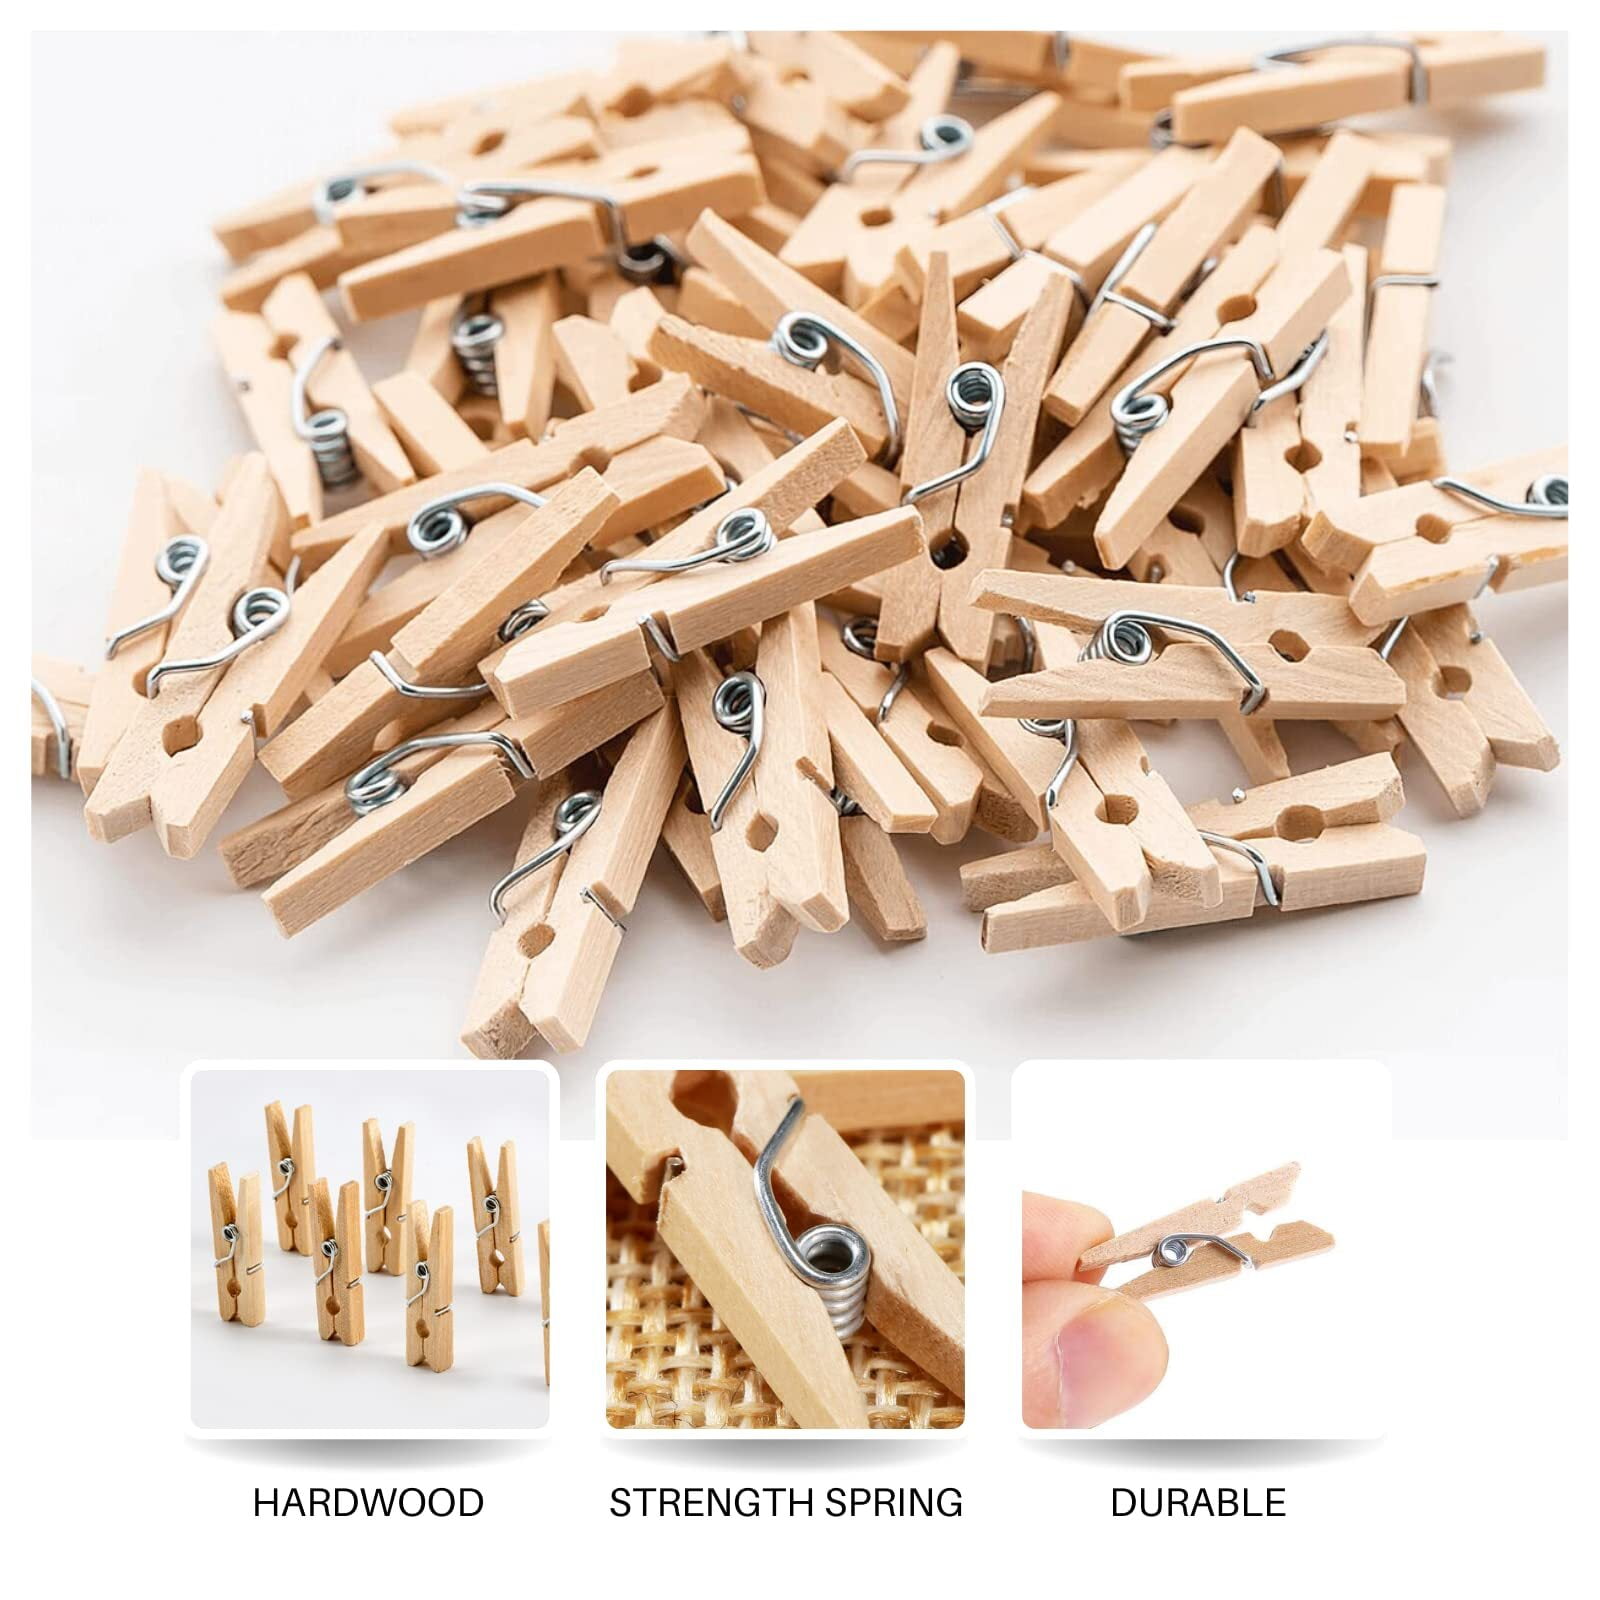 clberni Mini Clothes Pins for Photo, Small Clothespins 200 Pcs 1 inch Natural Wooden Mini Clothes Pins with Jute Twine, Mini Photo Clip, Adult Unisex, Size